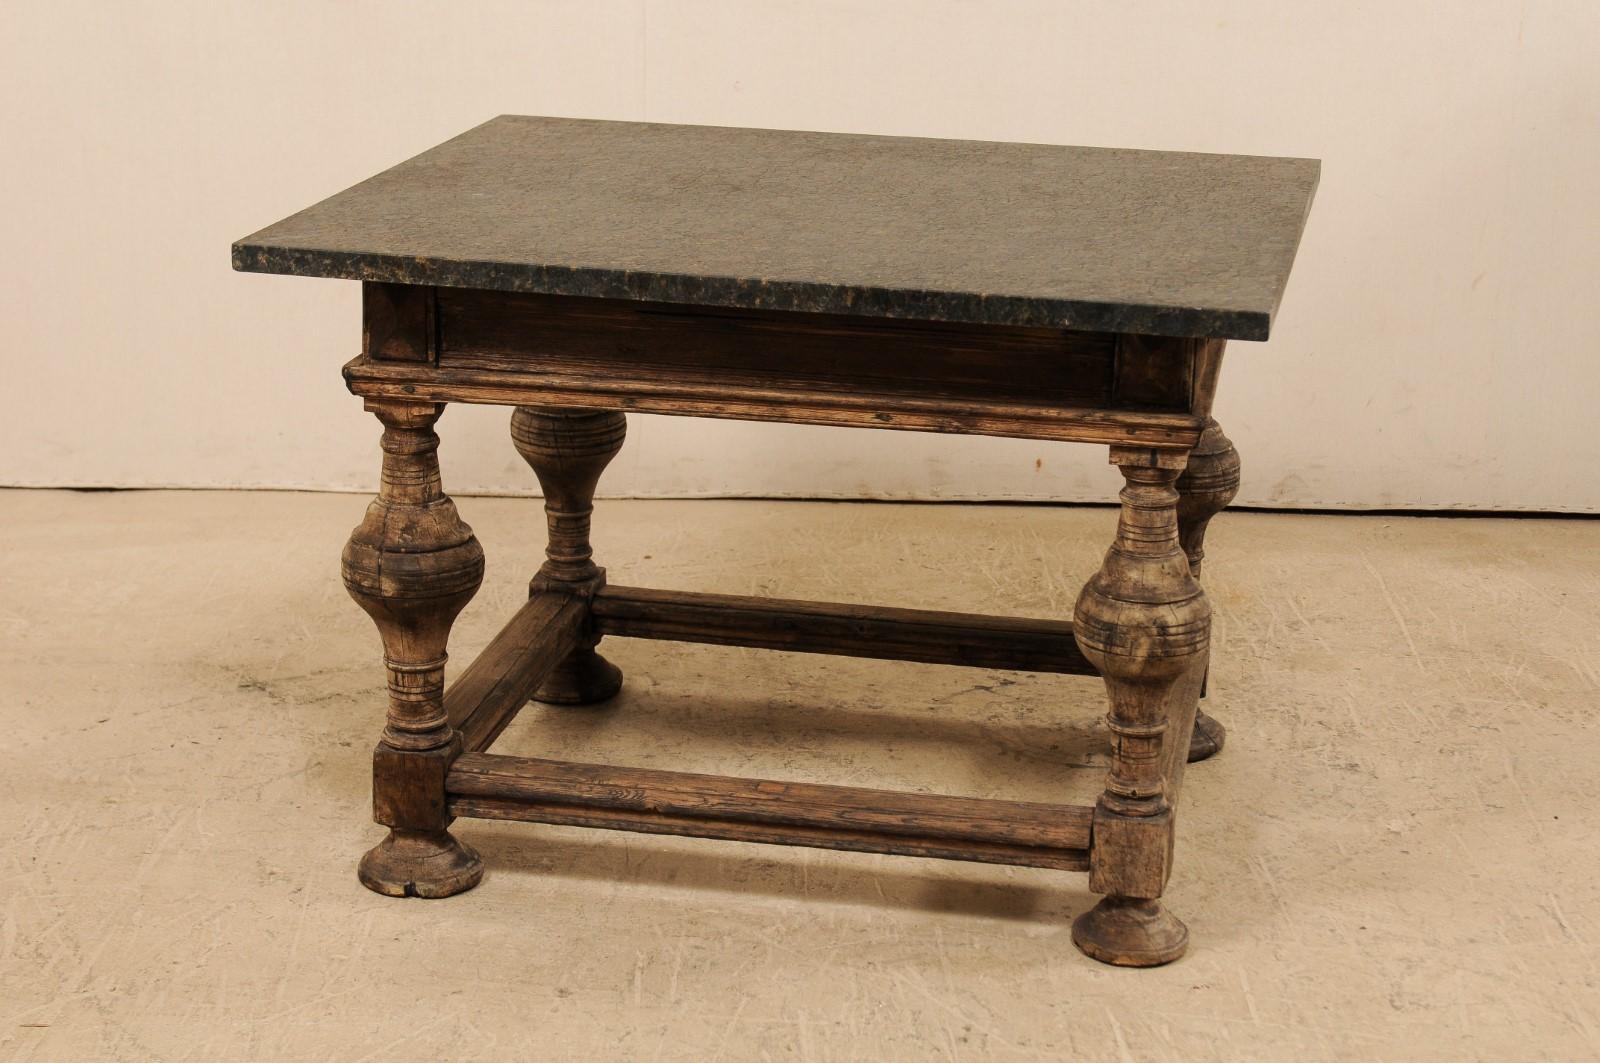 Carved 18th Century Swedish Baroque Occasional Table with New Honed Granite Top For Sale